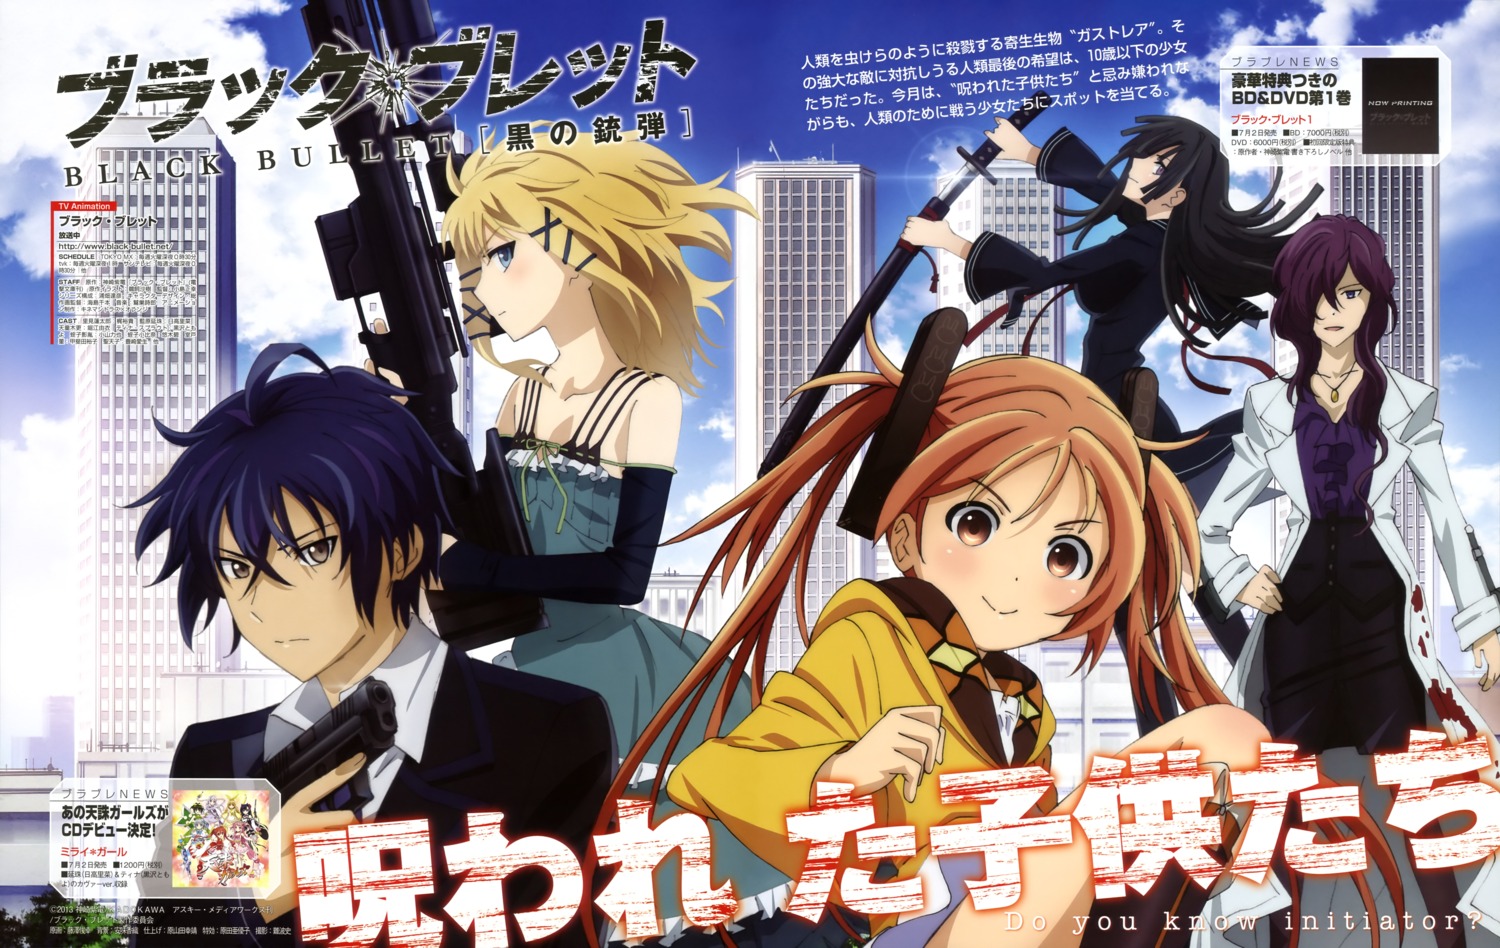 Black Bullet - Characters & Staff 